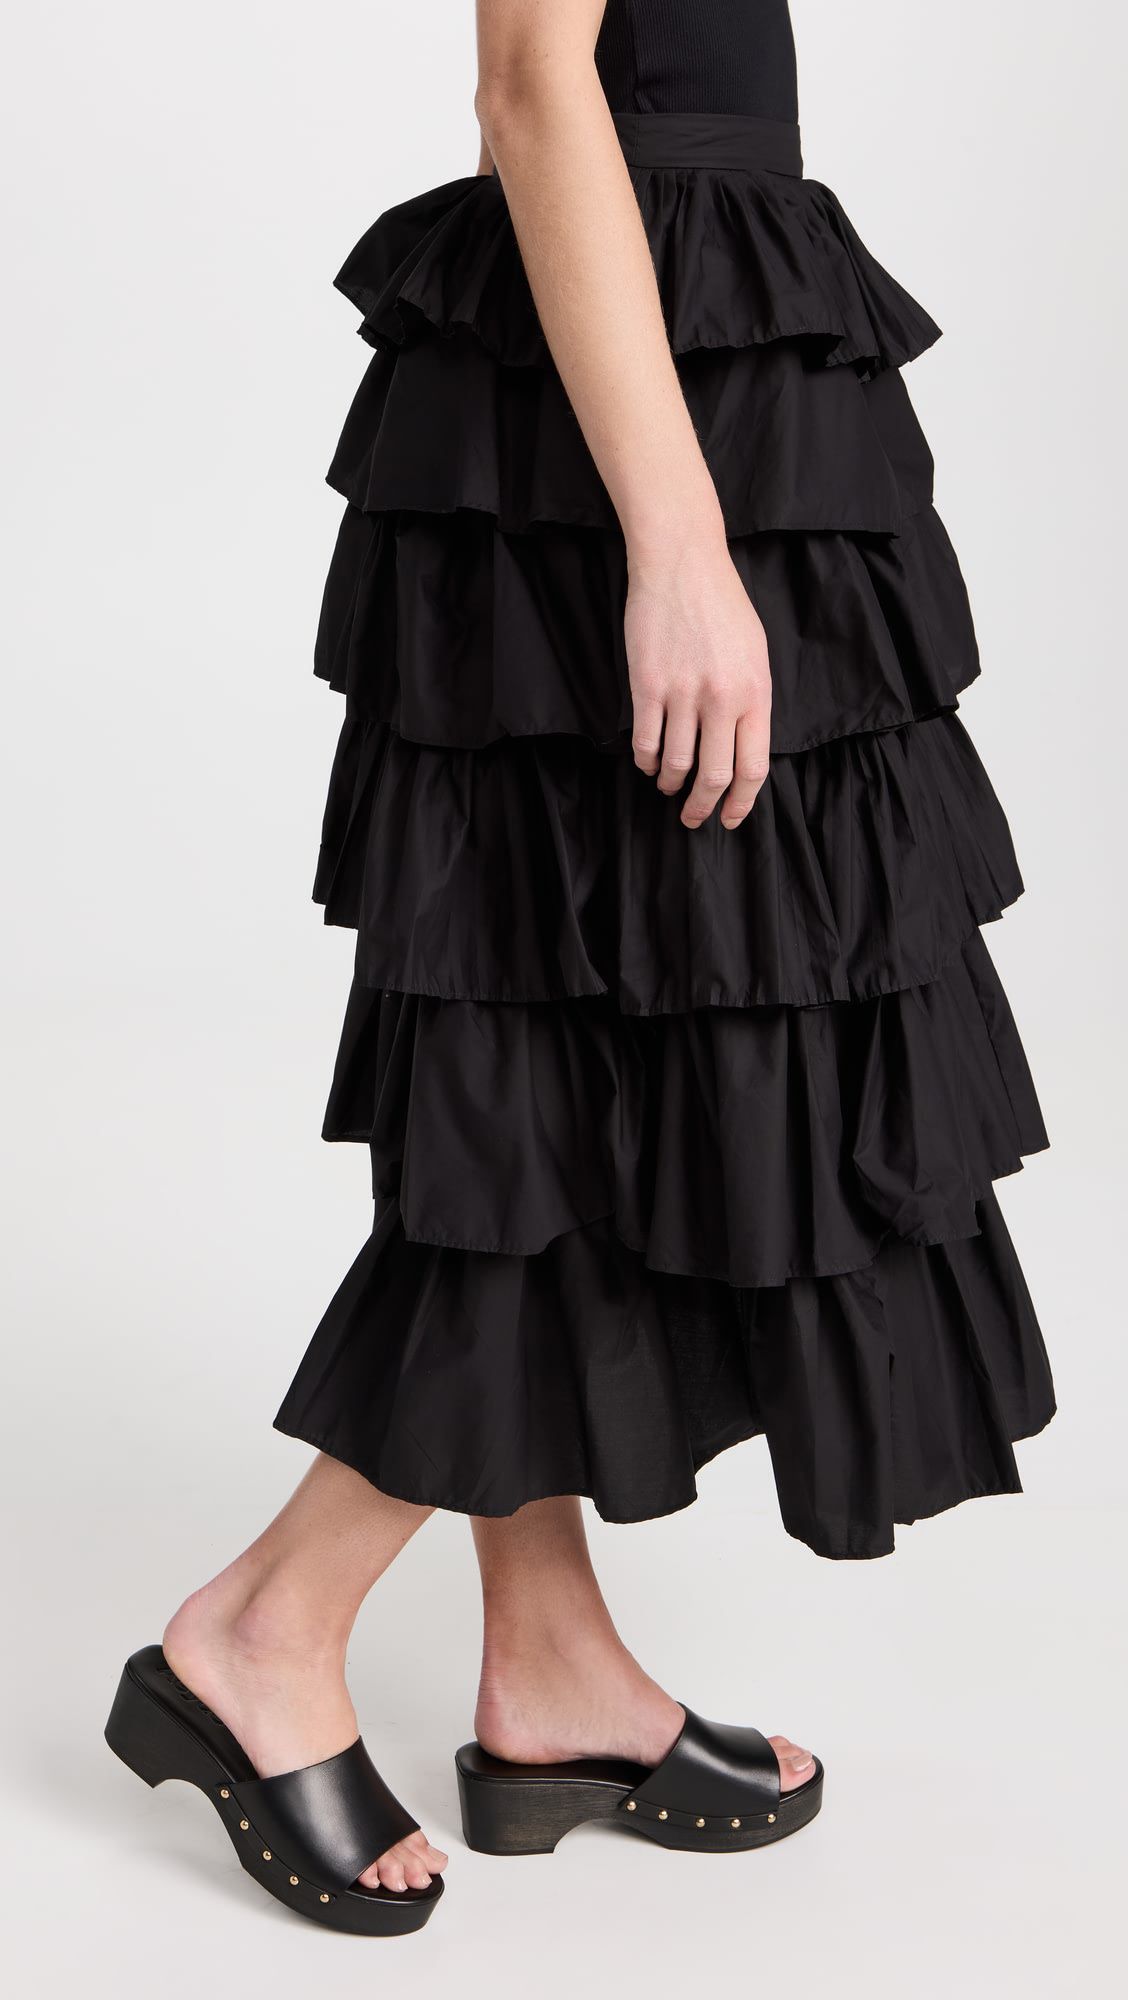 High-waisted Puffy Skirt With Lotus Leaves